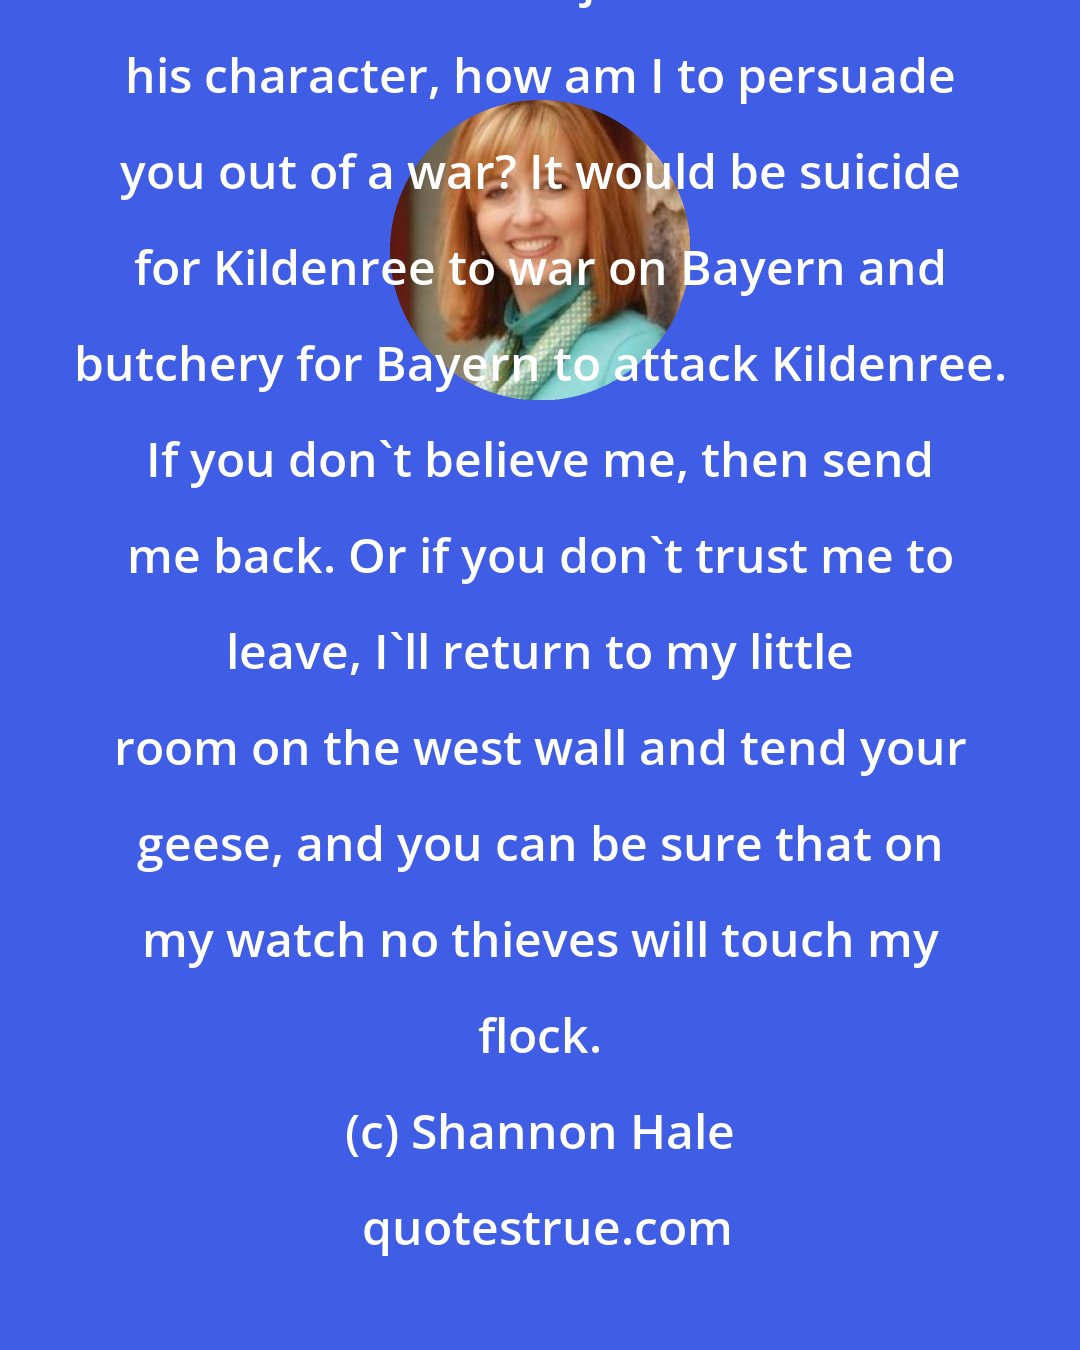 Shannon Hale: But in a country where you hang your dead up on walls and pride whether or not a man bears a javelin more than his character, how am I to persuade you out of a war? It would be suicide for Kildenree to war on Bayern and butchery for Bayern to attack Kildenree. If you don't believe me, then send me back. Or if you don't trust me to leave, I'll return to my little room on the west wall and tend your geese, and you can be sure that on my watch no thieves will touch my flock.